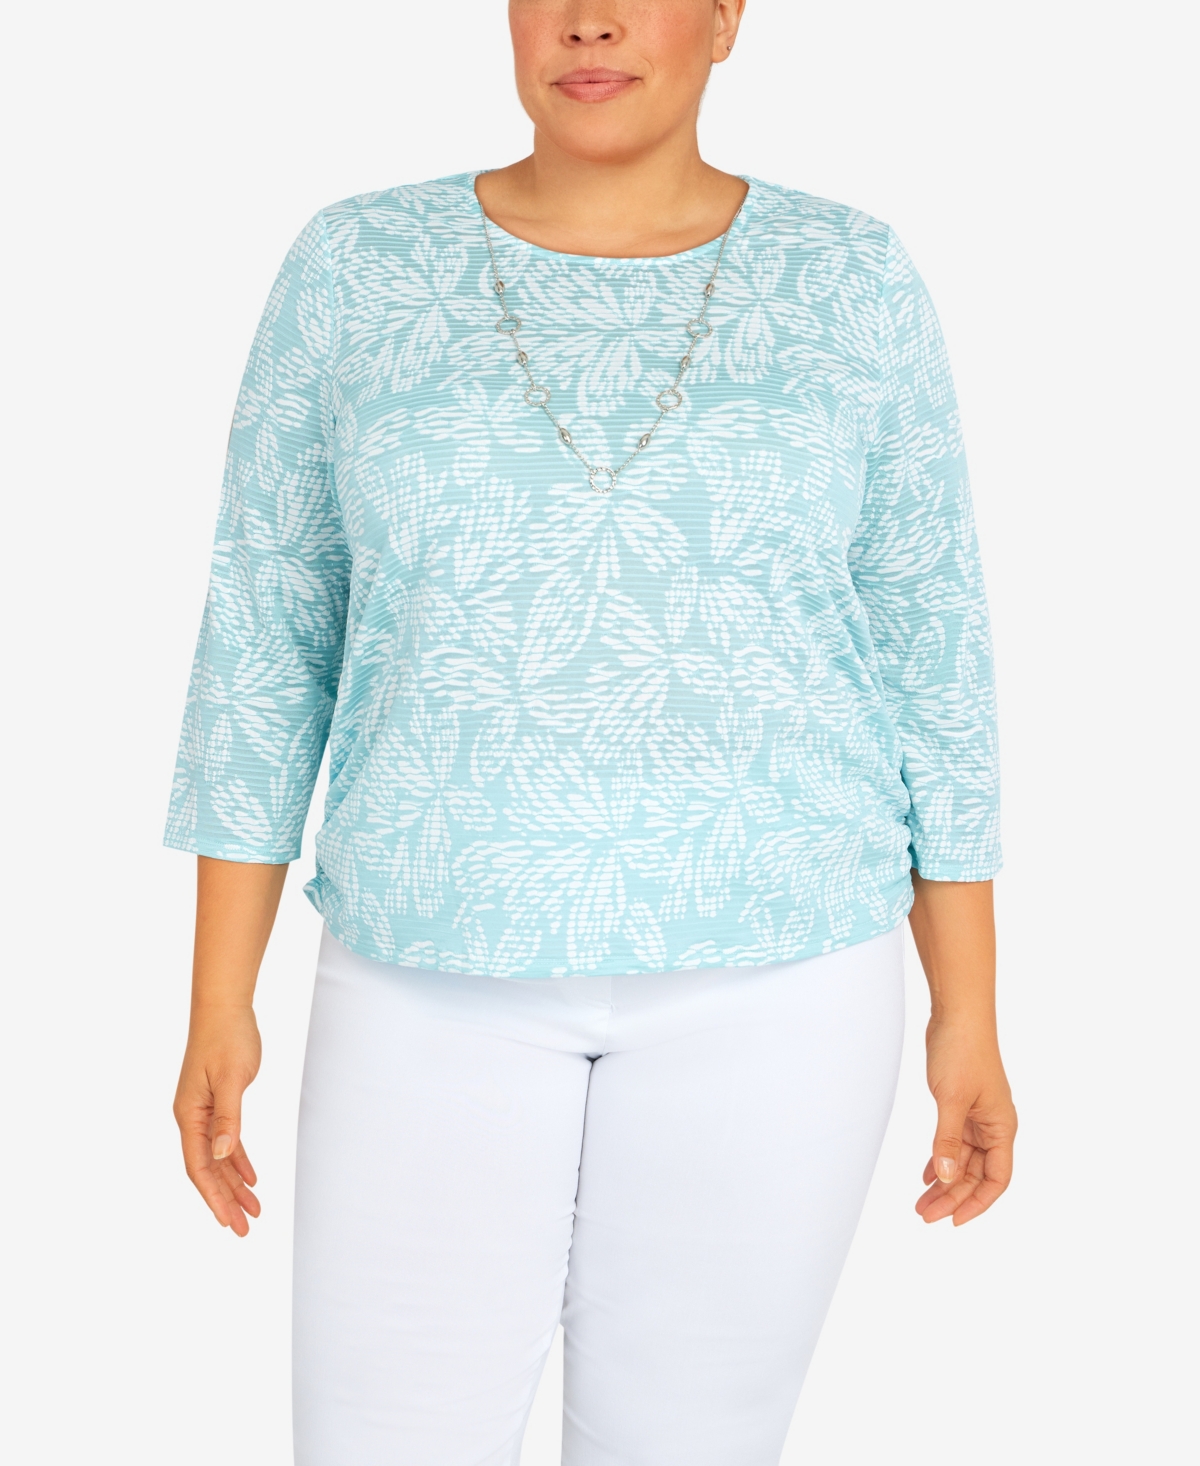 Alfred Dunner Plus Size Classic Floral Jacquard Butterfly Knit Top With Necklace In Blue Mist